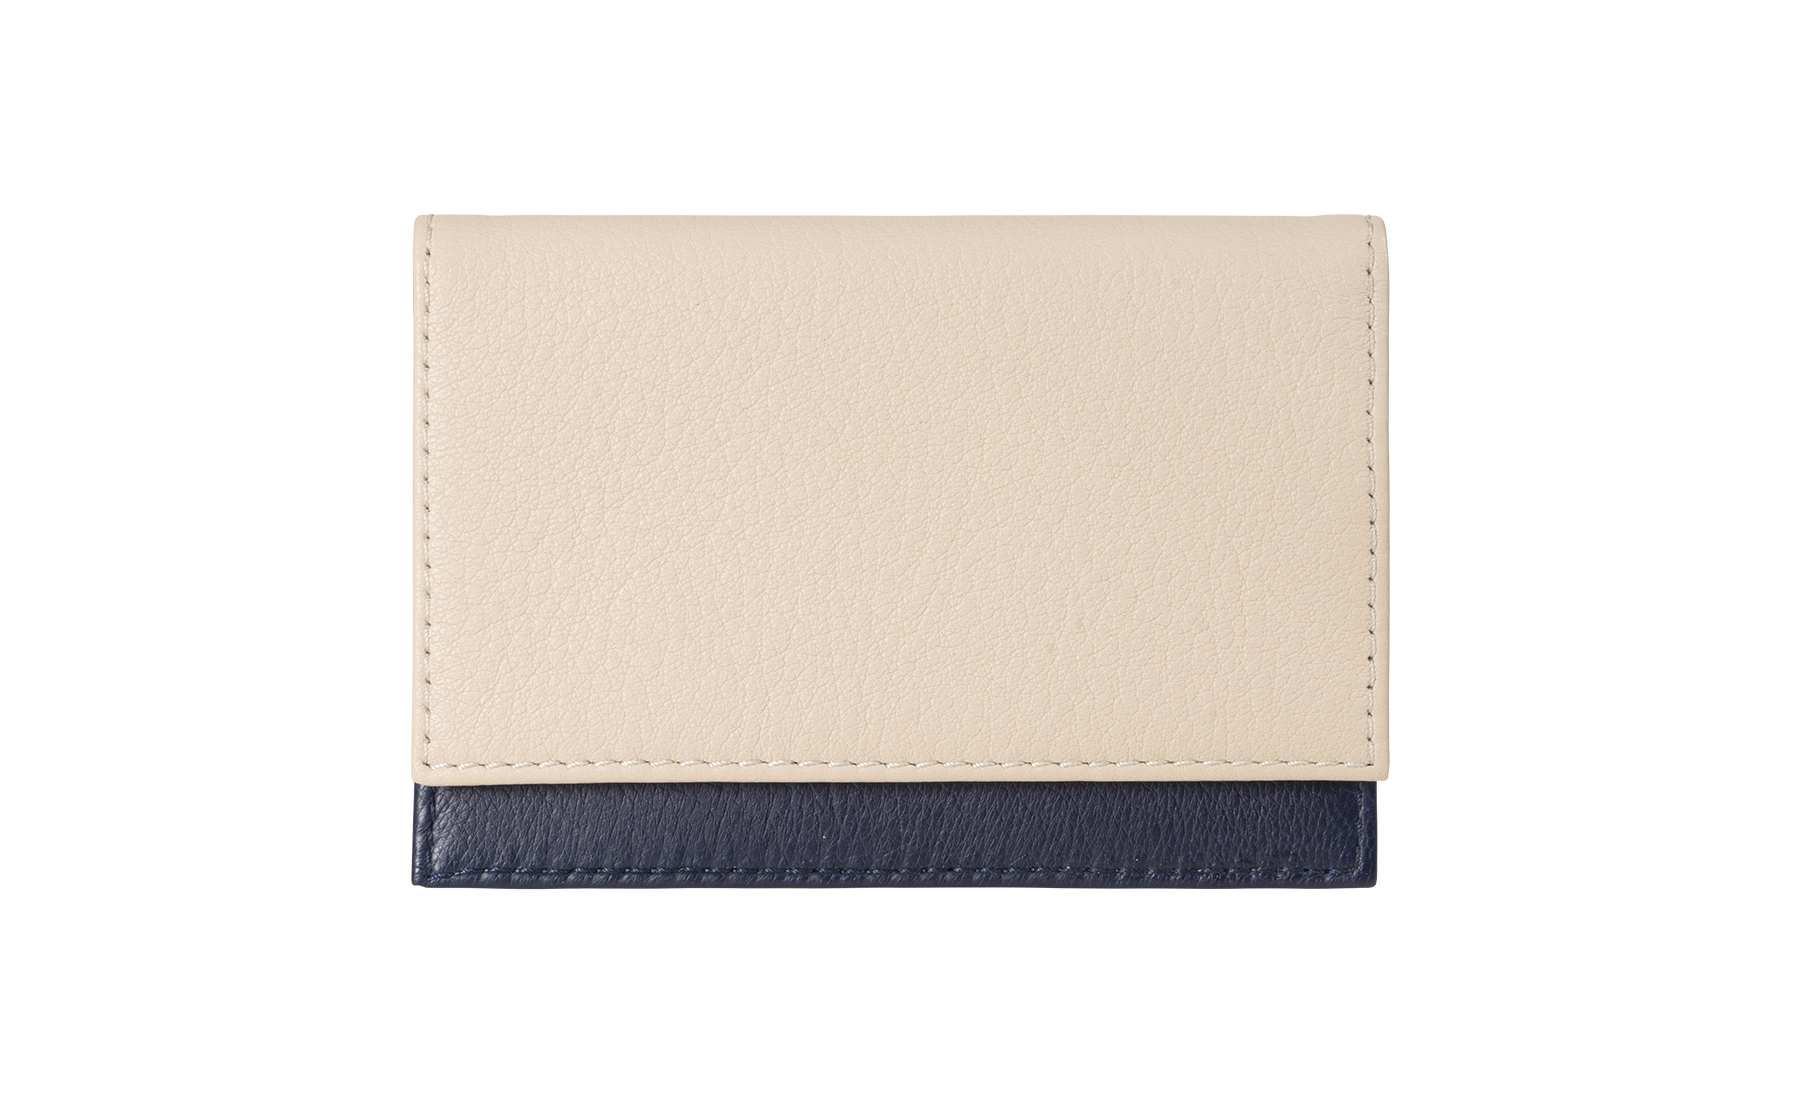 CREAM TYPE 4 business card case in ivory calfskin leather